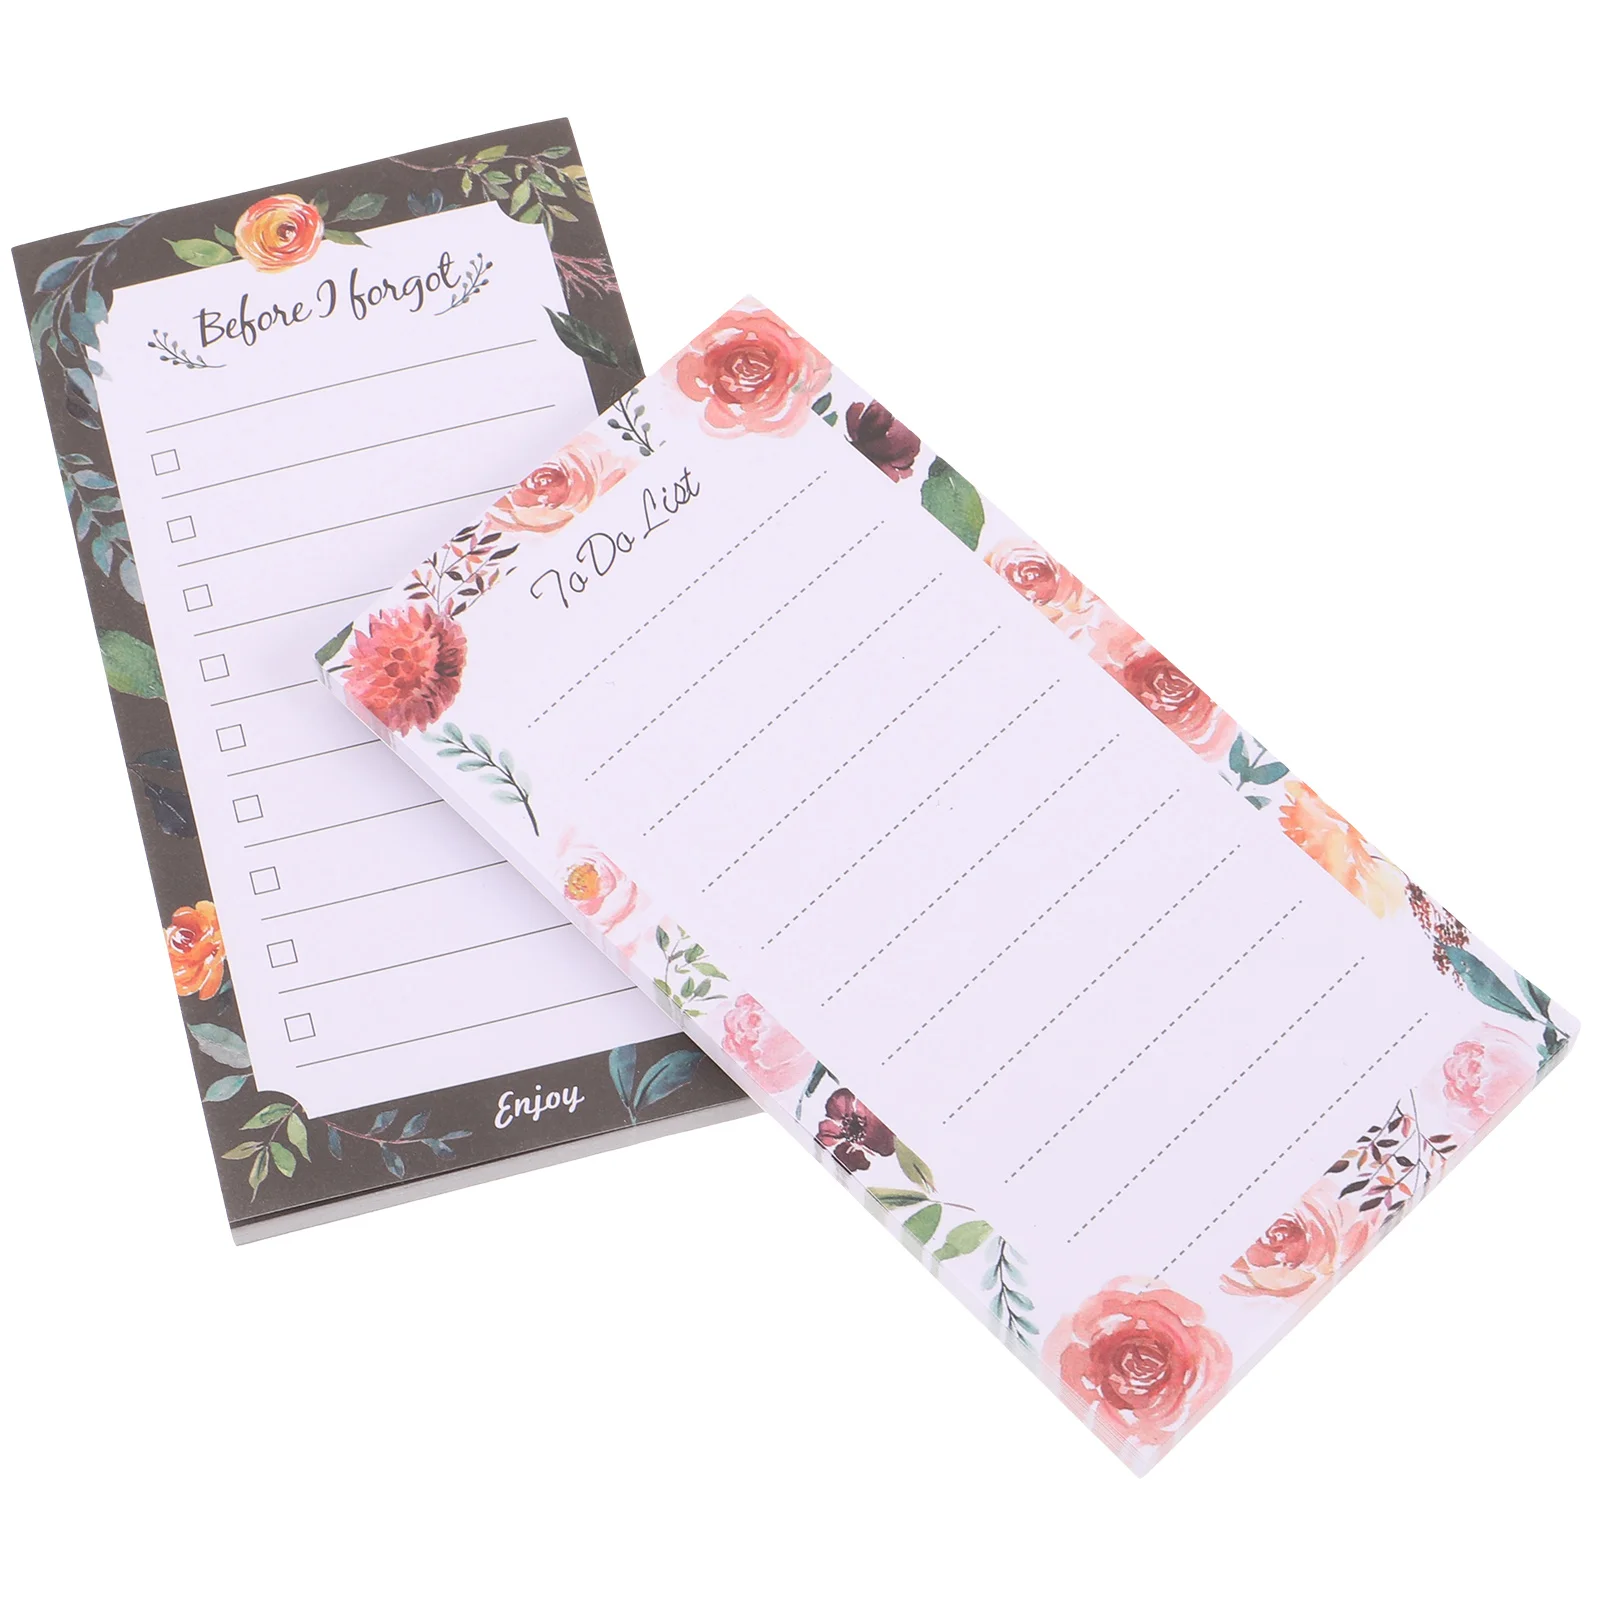 2 Pcs Magnetic Notepad Memo Notepads Fridge Small Notebook with Grocery List Soft to Do